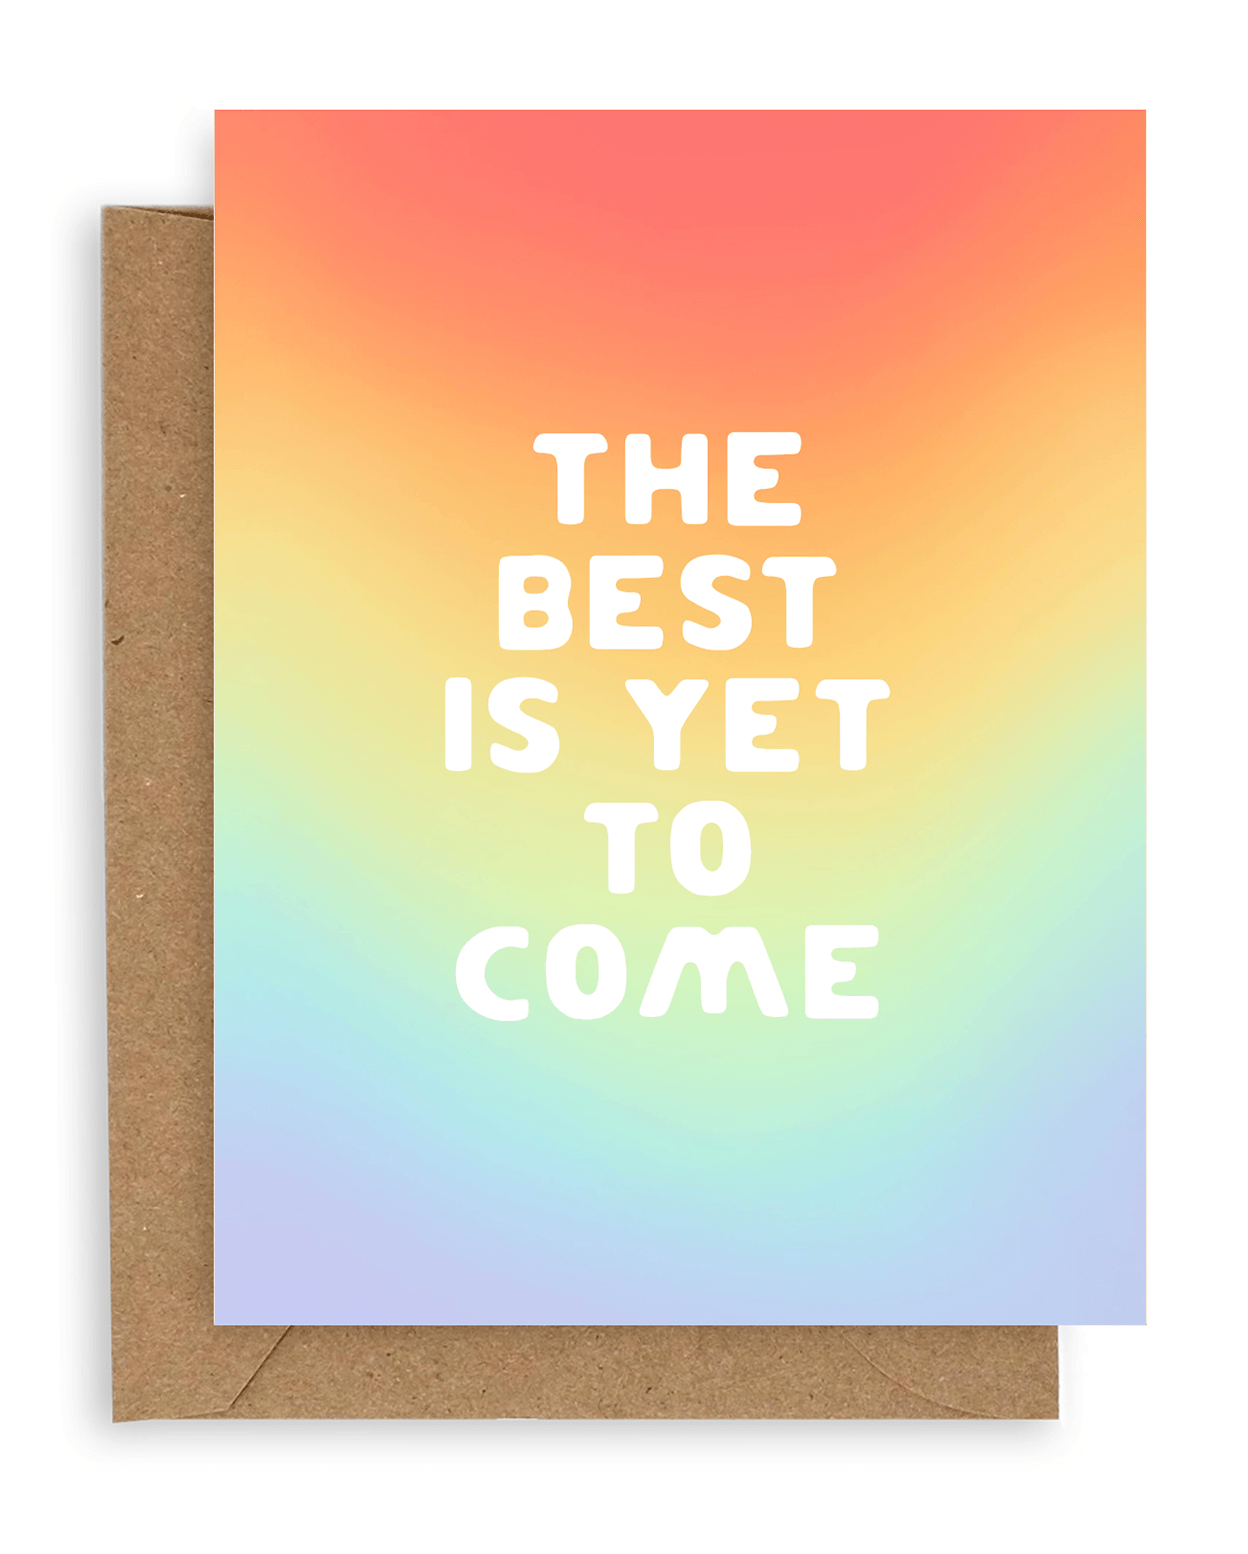 Rainbow gradient background with "The Best Is Yet To Come" in bold, white font printed on cardstock resting on a kraft envelope.